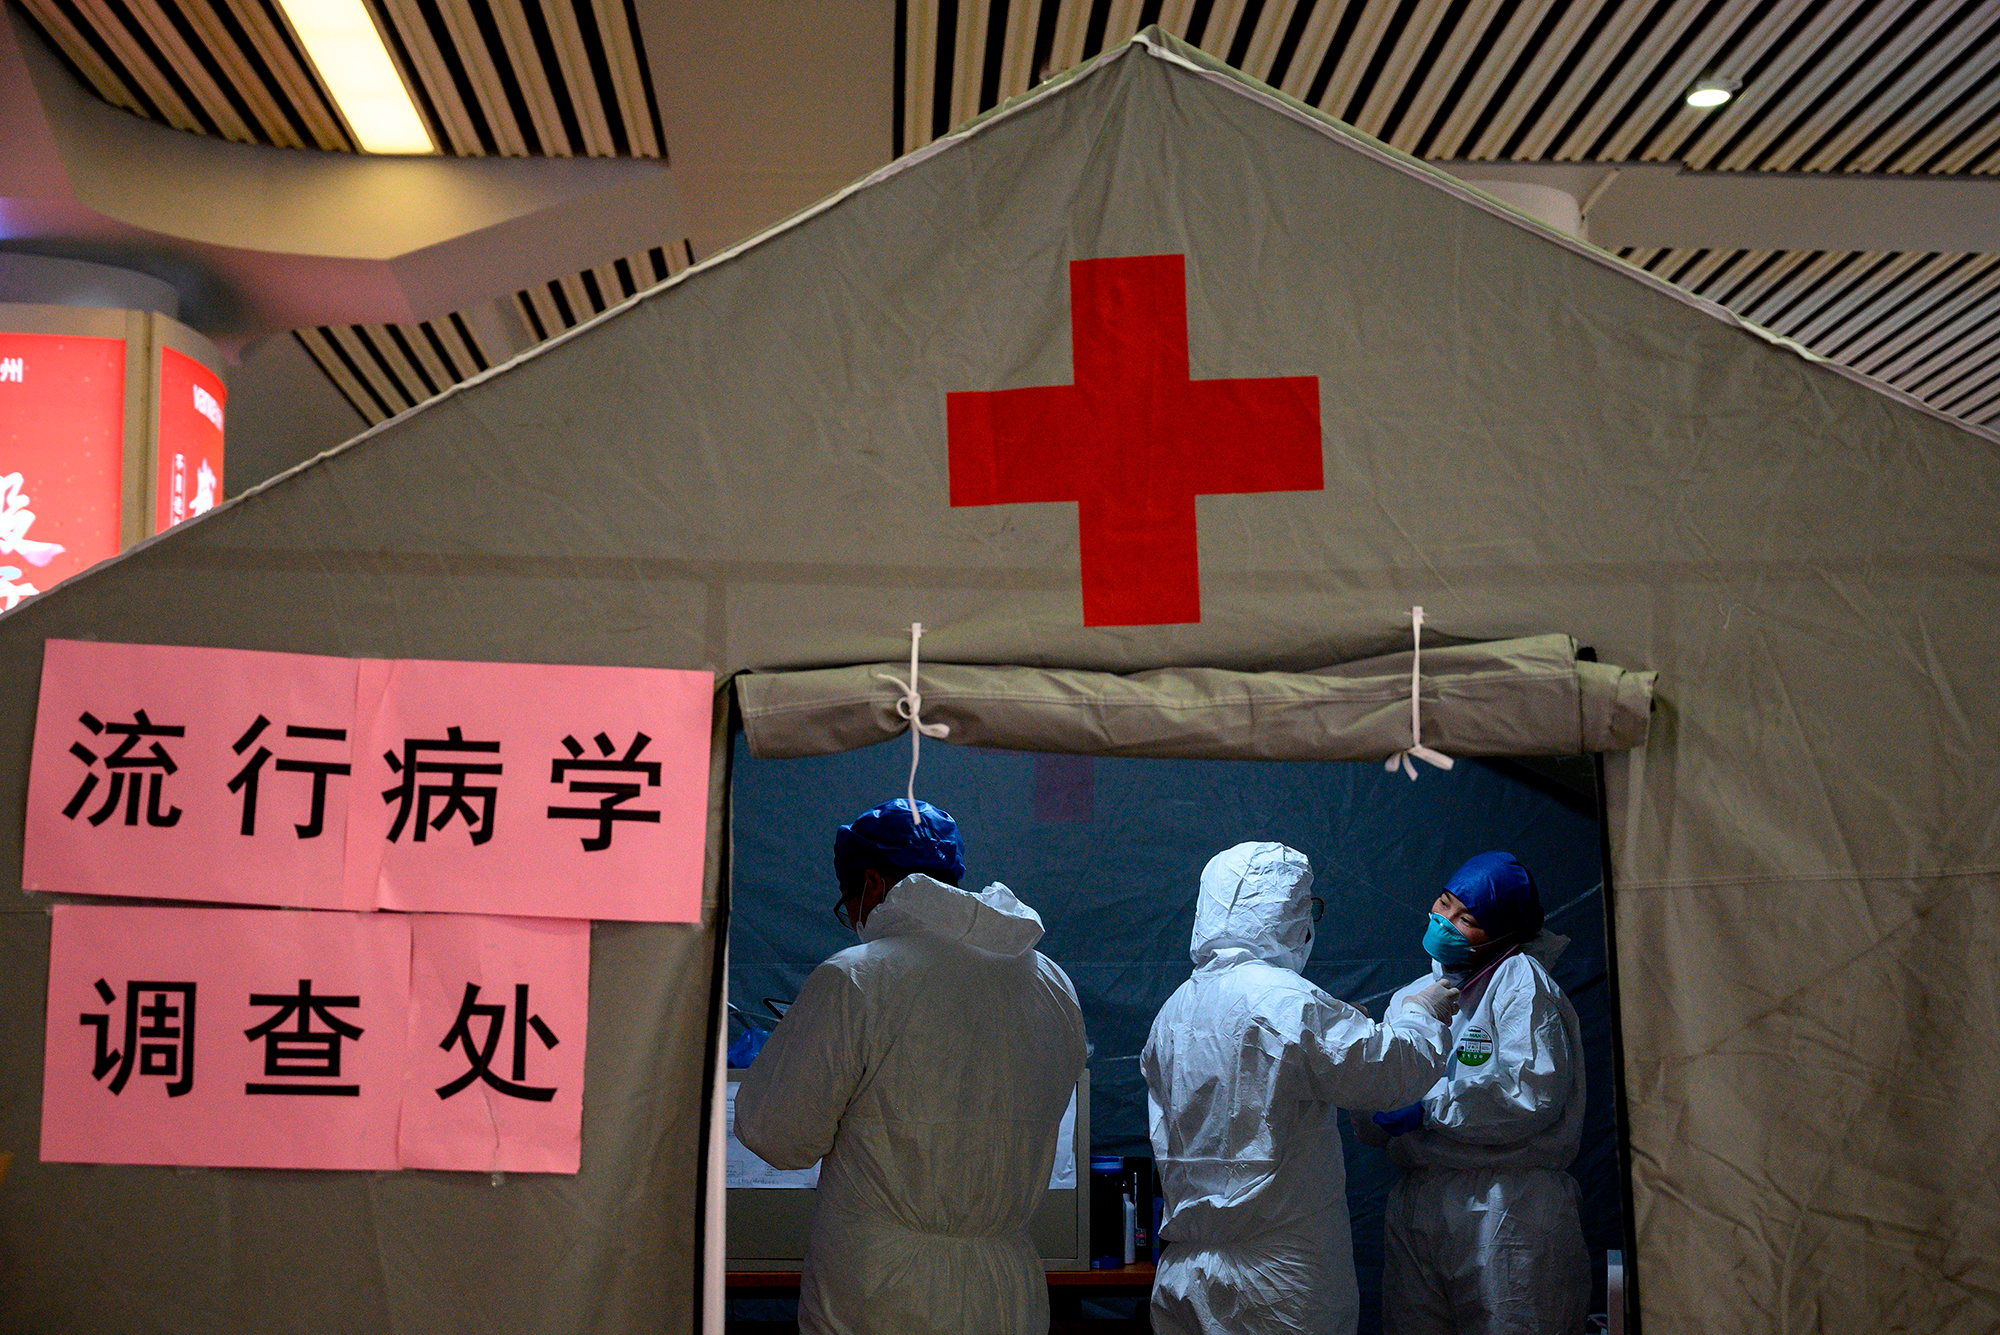 Health personnel work at their medical tent erected at the Hangzhou East Railway station in Hangzhou on February 5.